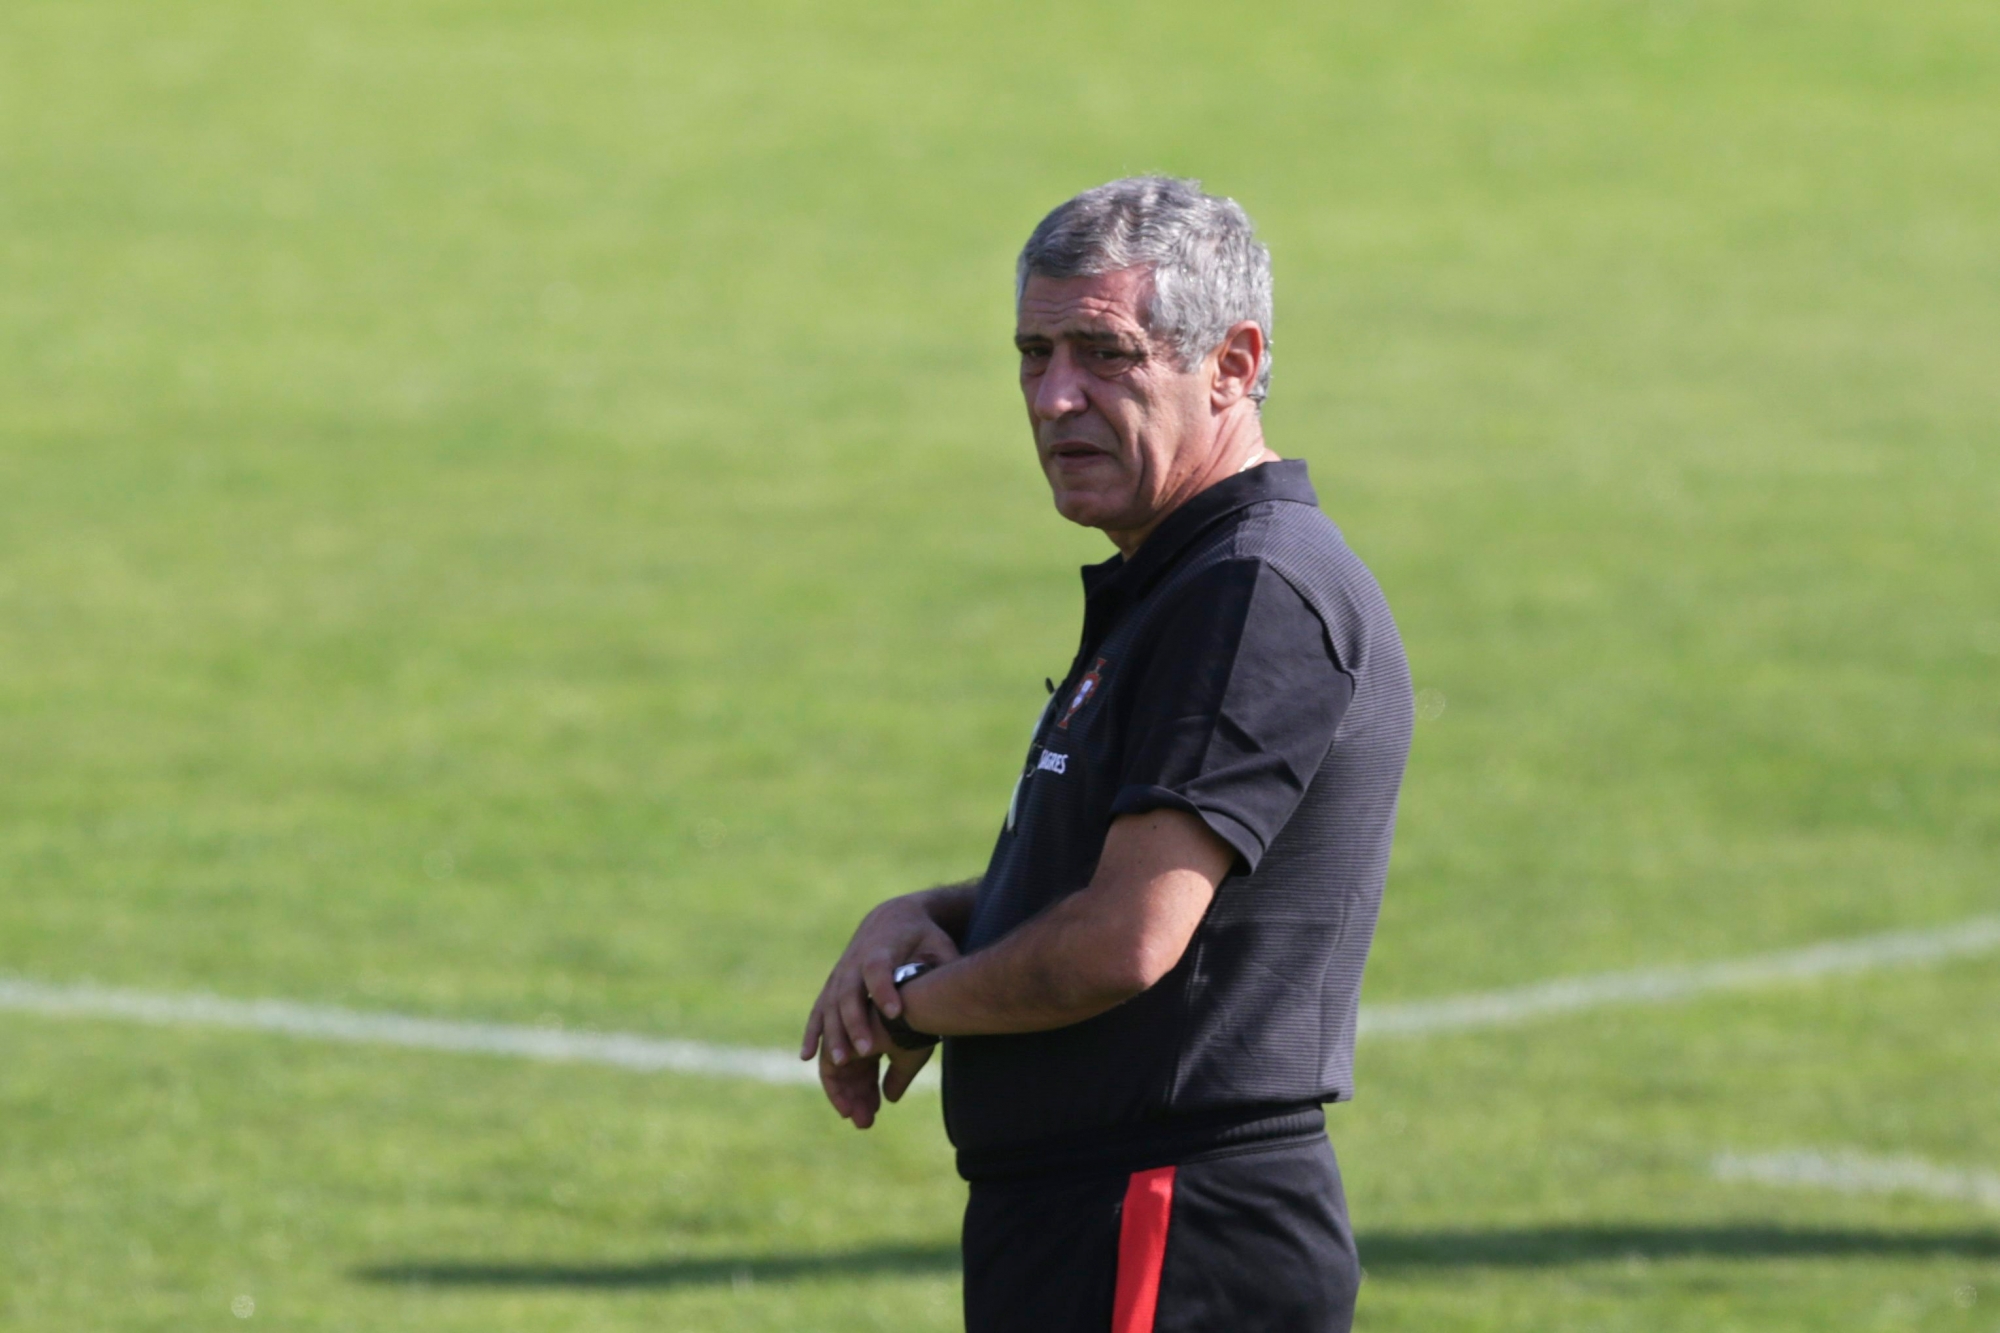 Portugal coach Fernando Santos directs a training session in Oeiras, outside Lisbon, Monday, Oct. 9, 2017. Portugal will face Switzerland in a World Cup Group B qualifying soccer match in Lisbon Tuesday. (AP Photo/Armando Franca) SOCCER WCUP 2018 PORTUGAL SWITZERLAND